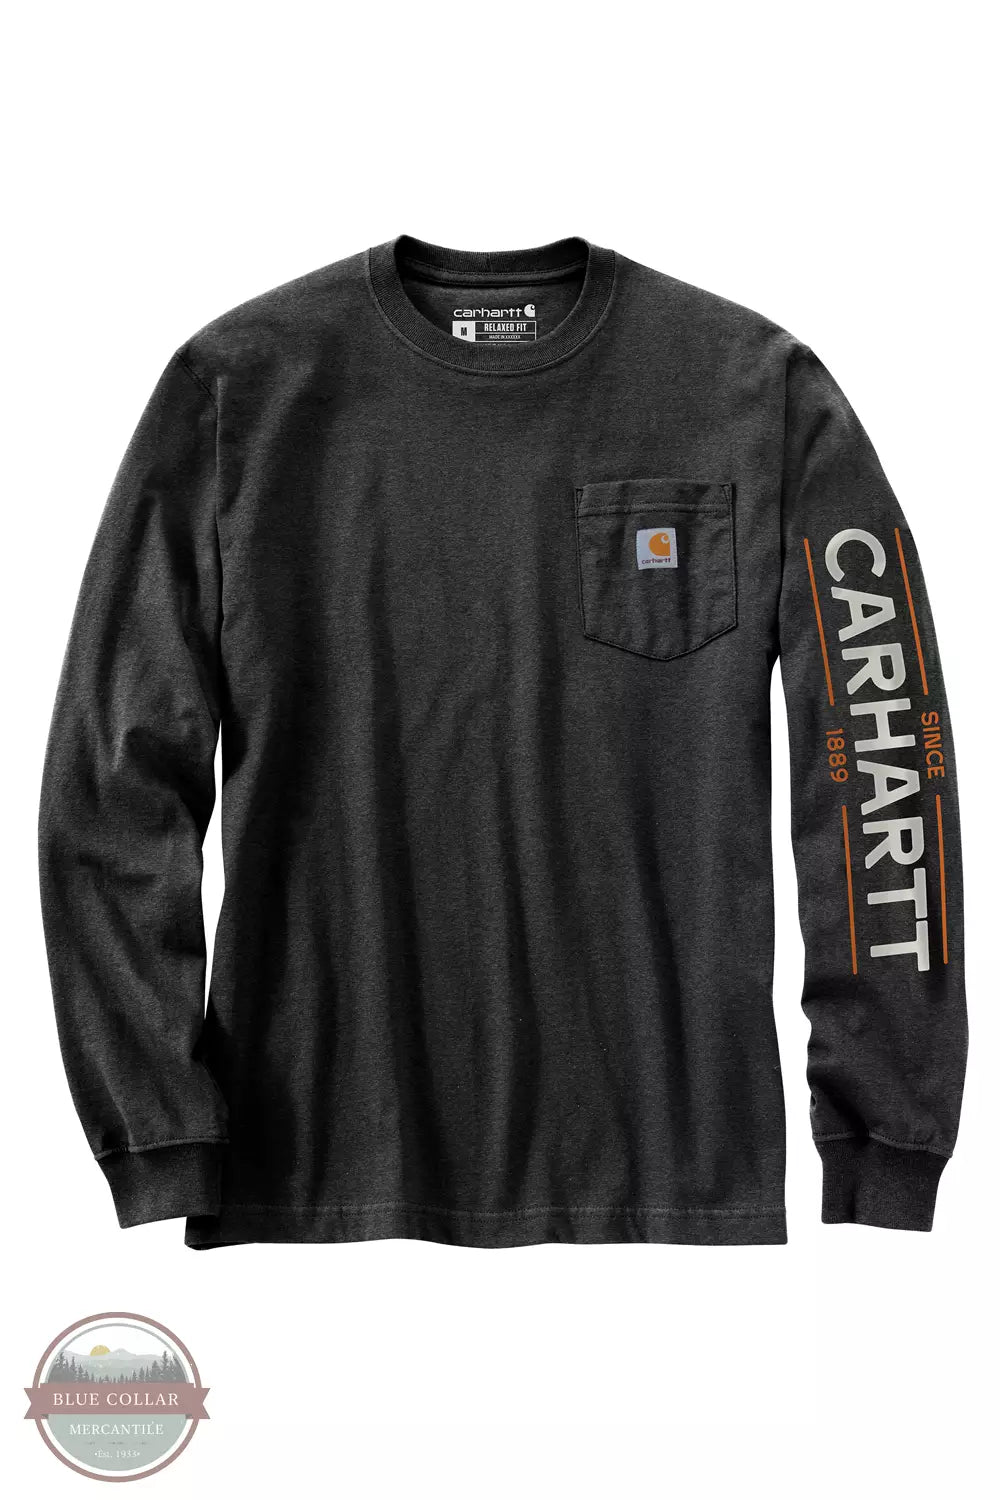 Carhartt 105957-CRH Loose Fit Heavyweight Hunt Graphic Long Sleeve T-Shirt in Carbon Heather Front View